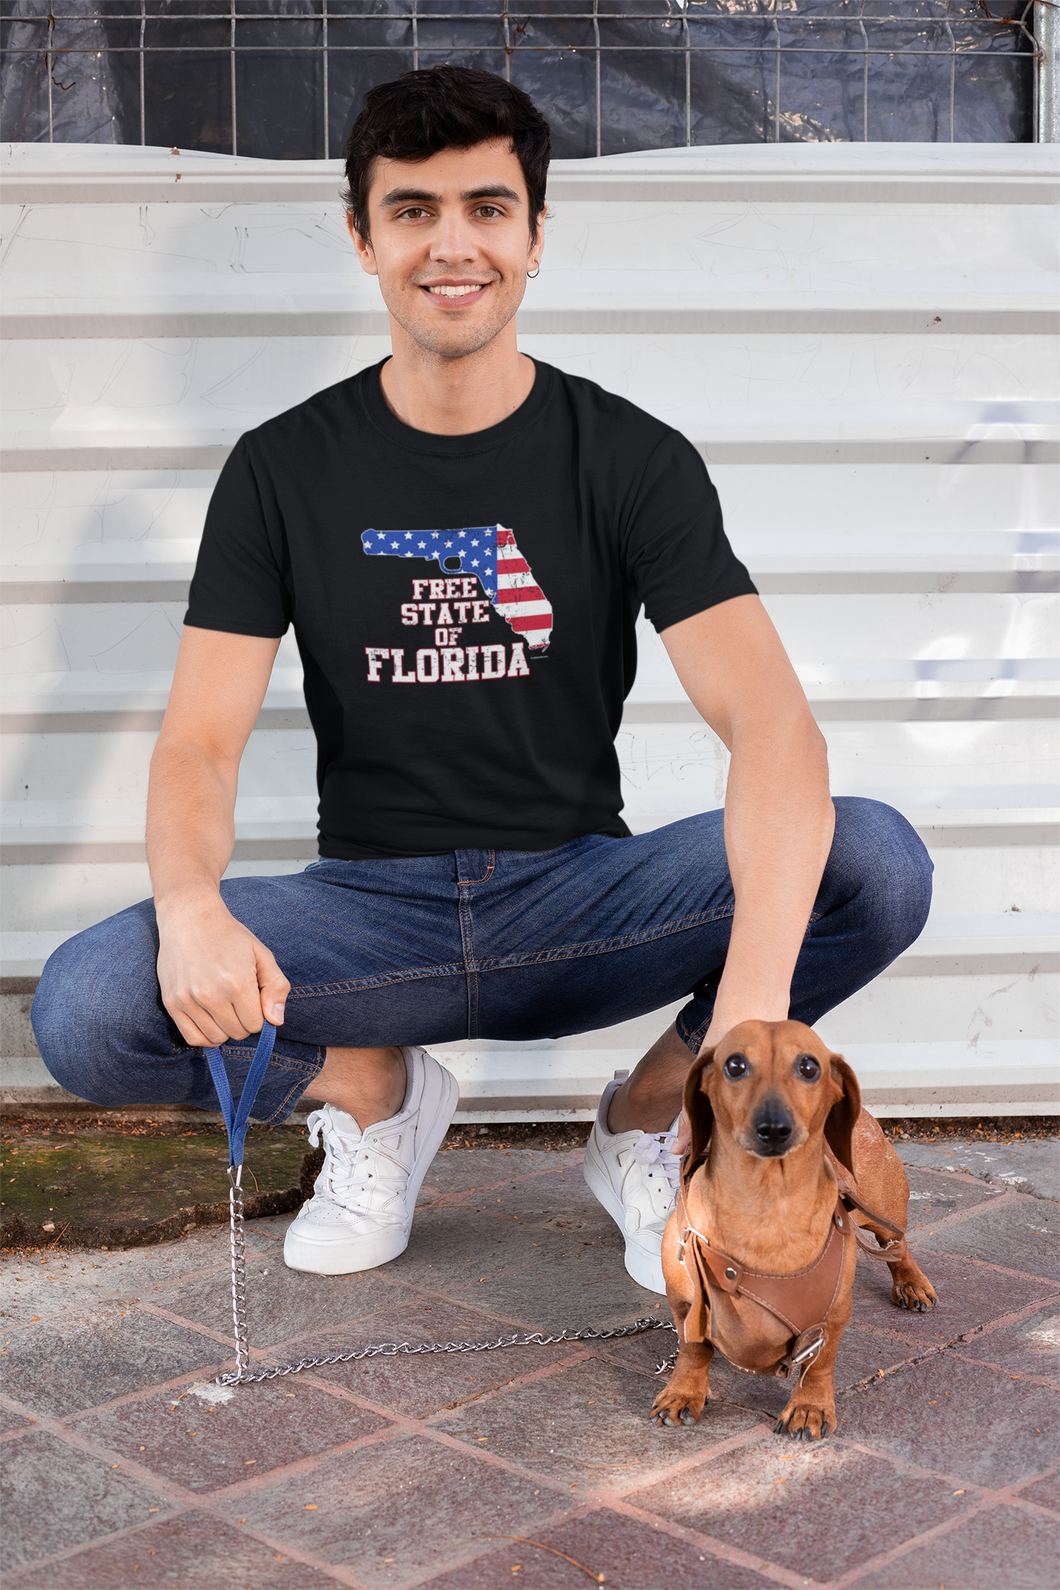 The Free State of Florida T-Shirt